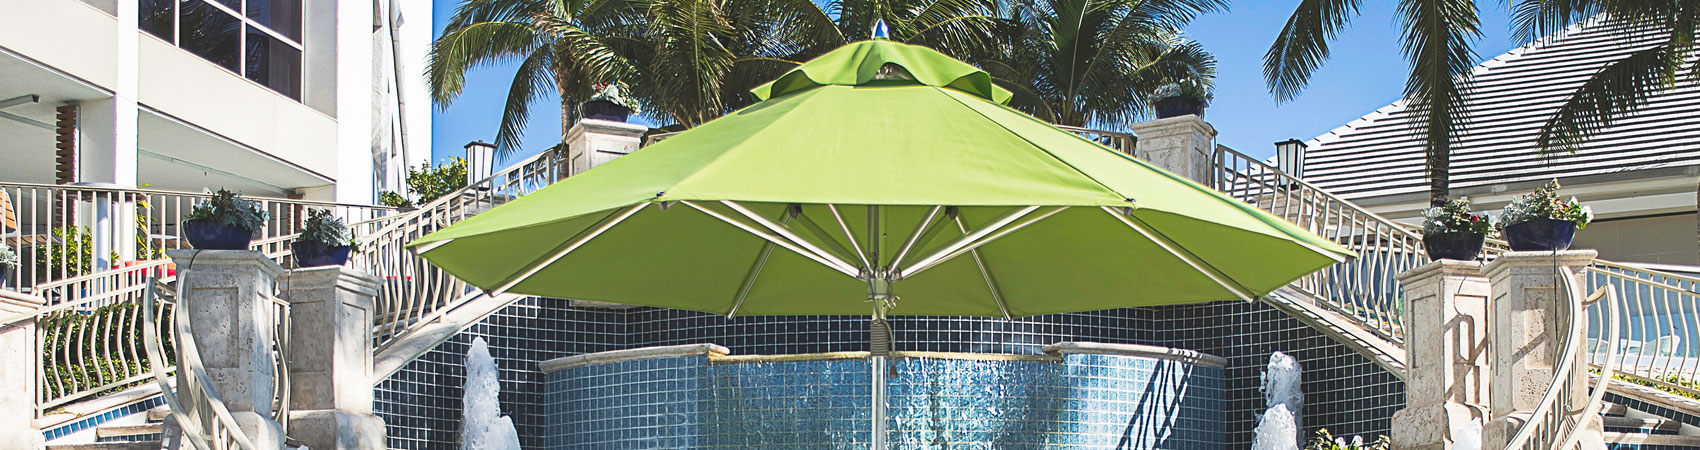 Green Frankford Greenwich Market Umbrella in a luxurious hospitality setting